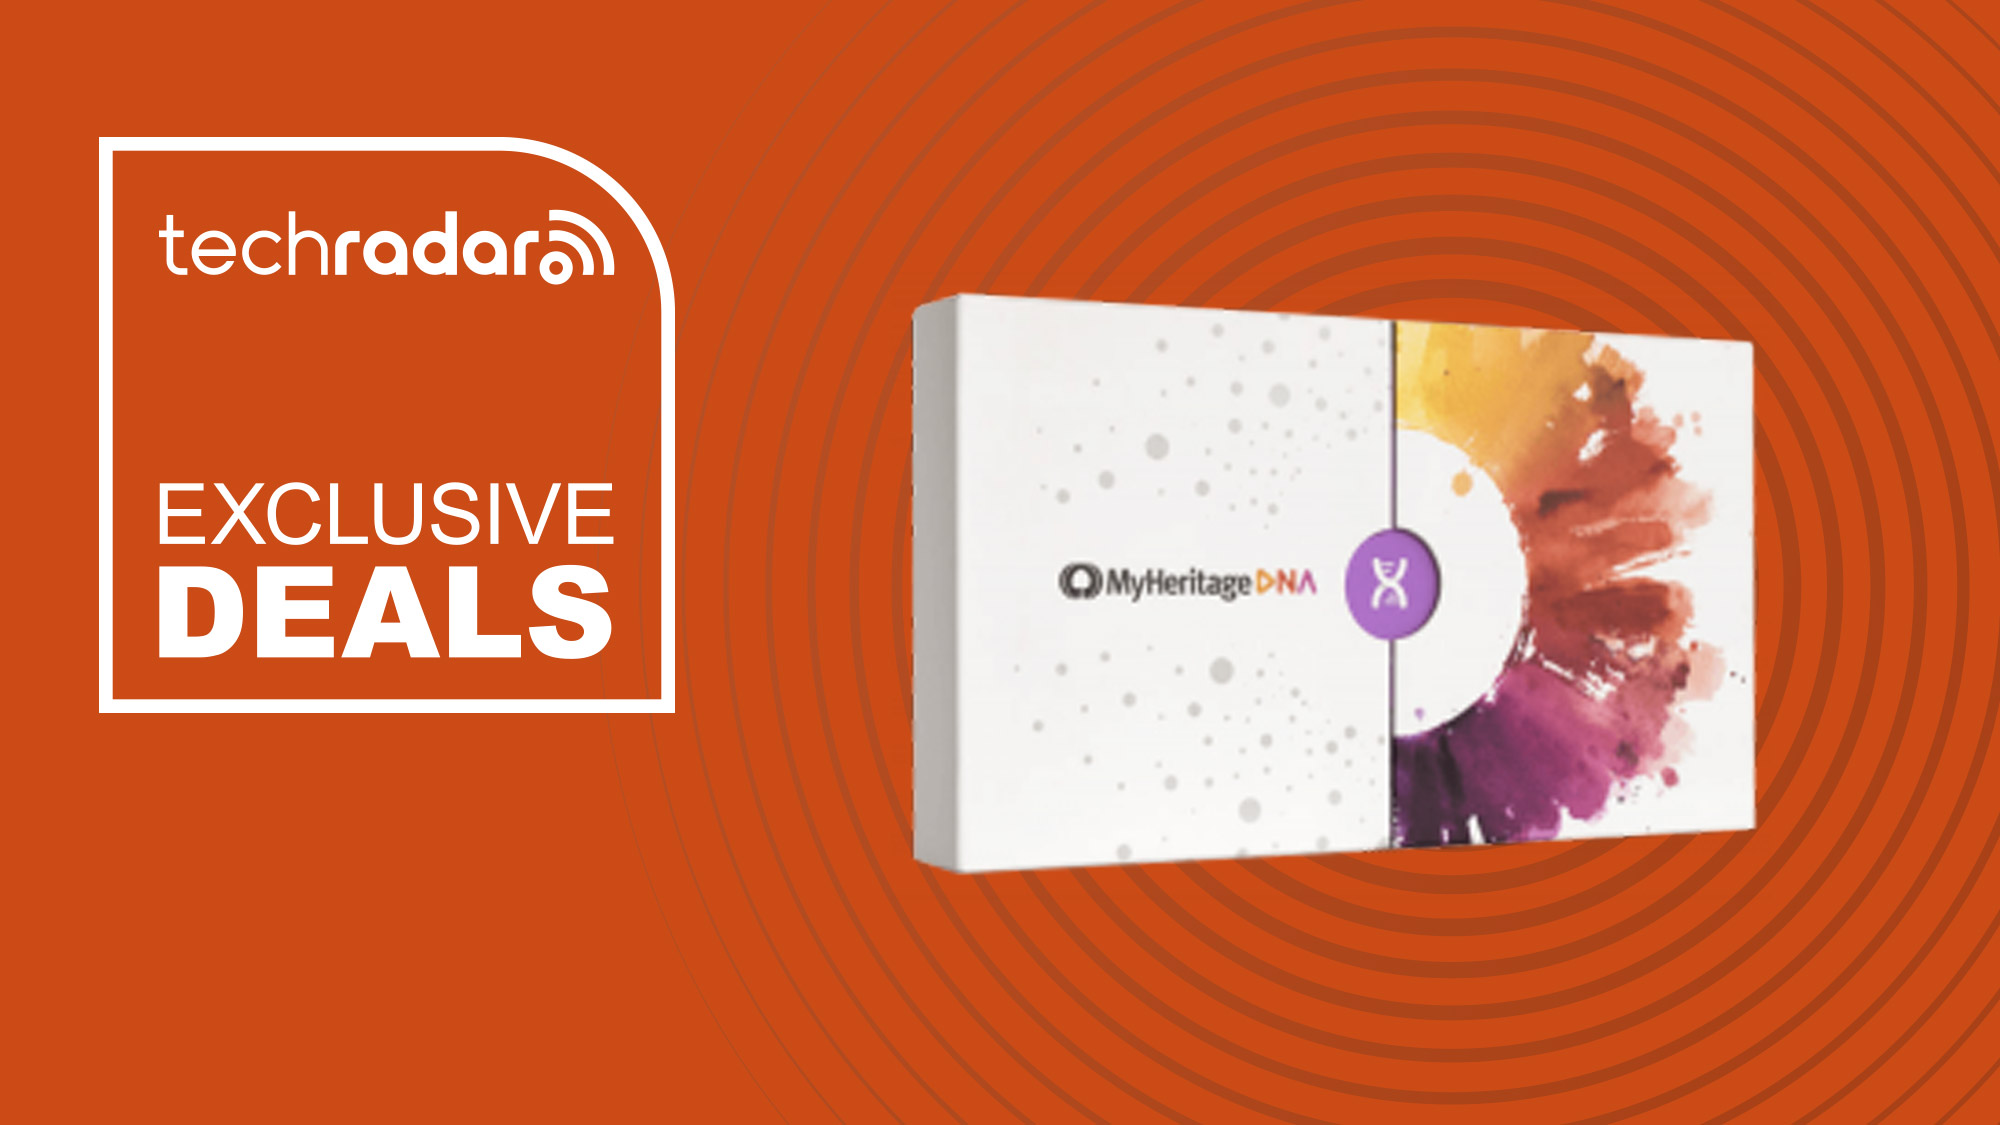 Exclusive Black Friday deal: the MyHeritage DNA Kit is just $32 for ...